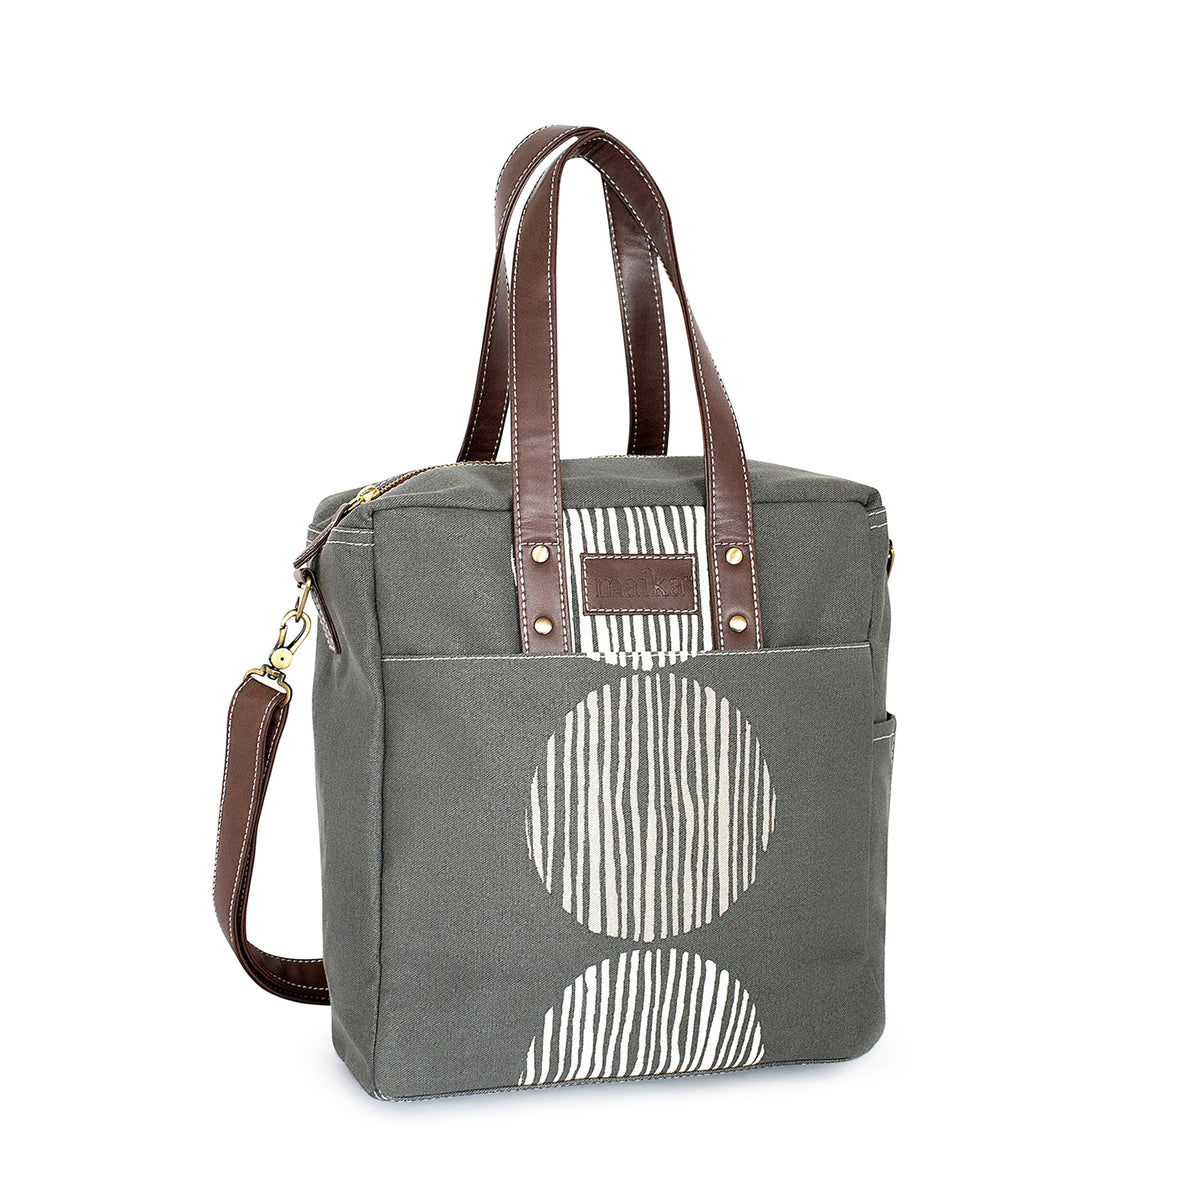 Commuter Tote - 4 color variant - Limited